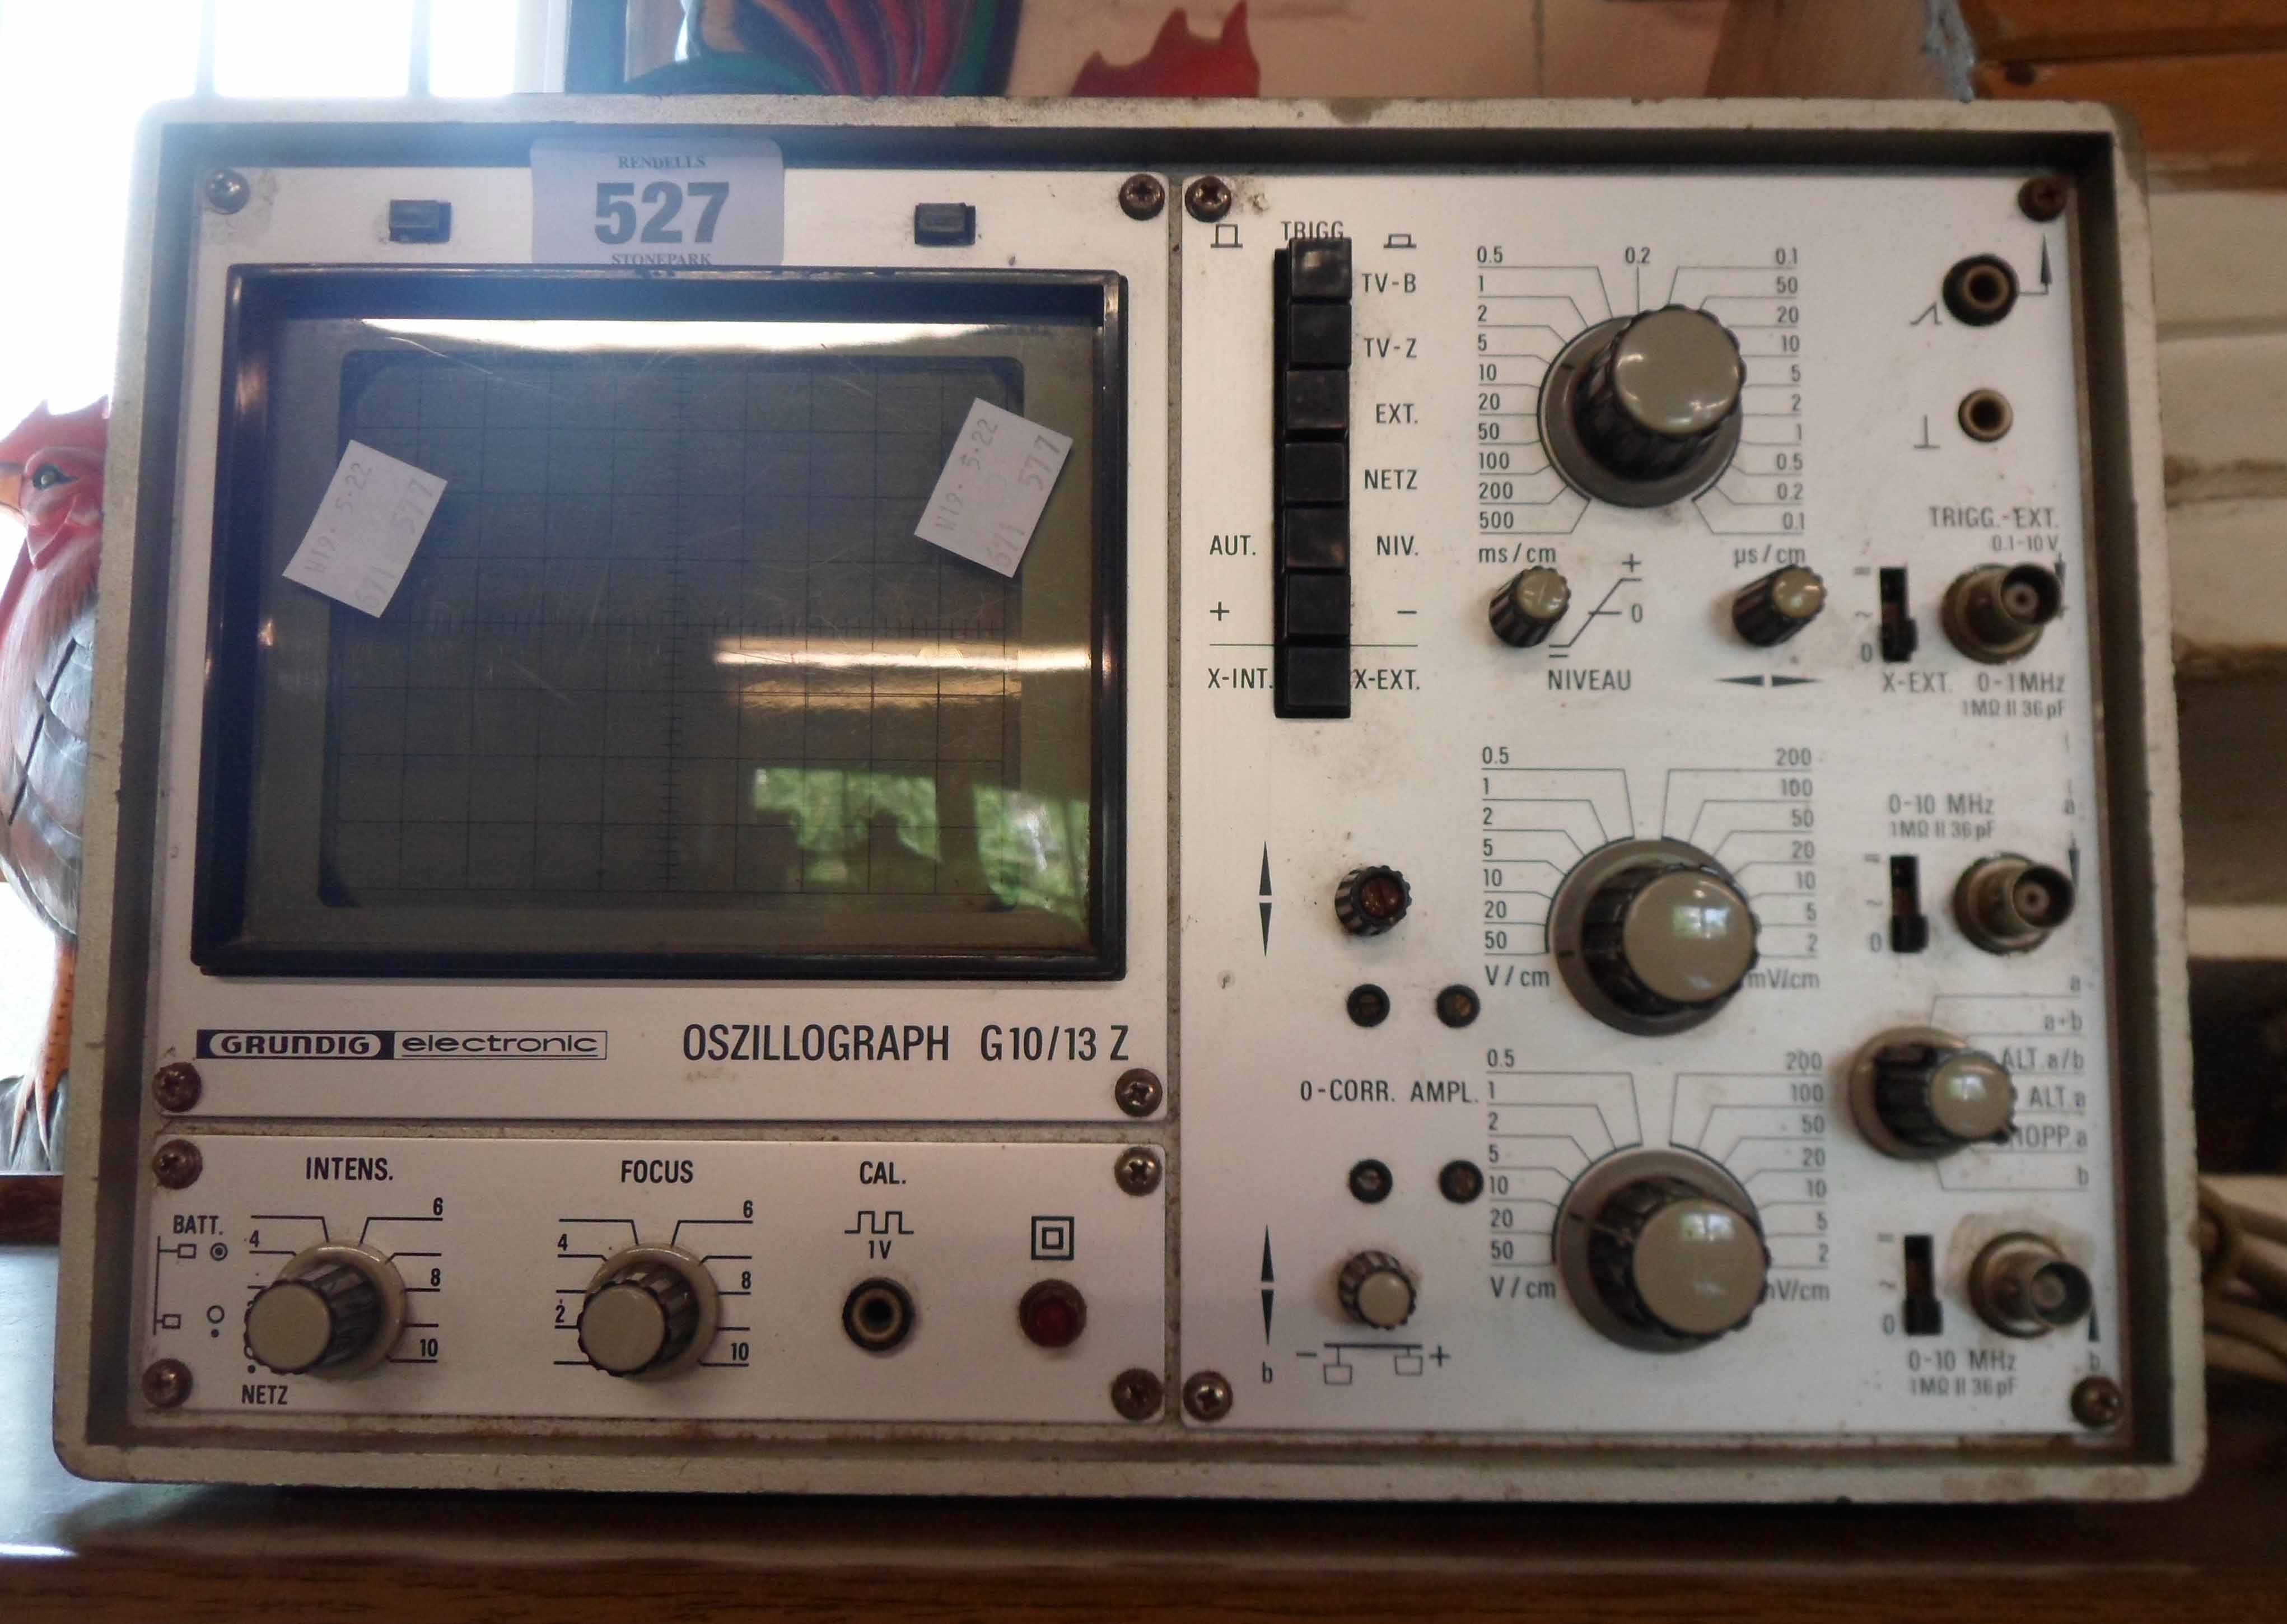 A vintage Grundig electronic oszillograph G10/13Z for testing televisions